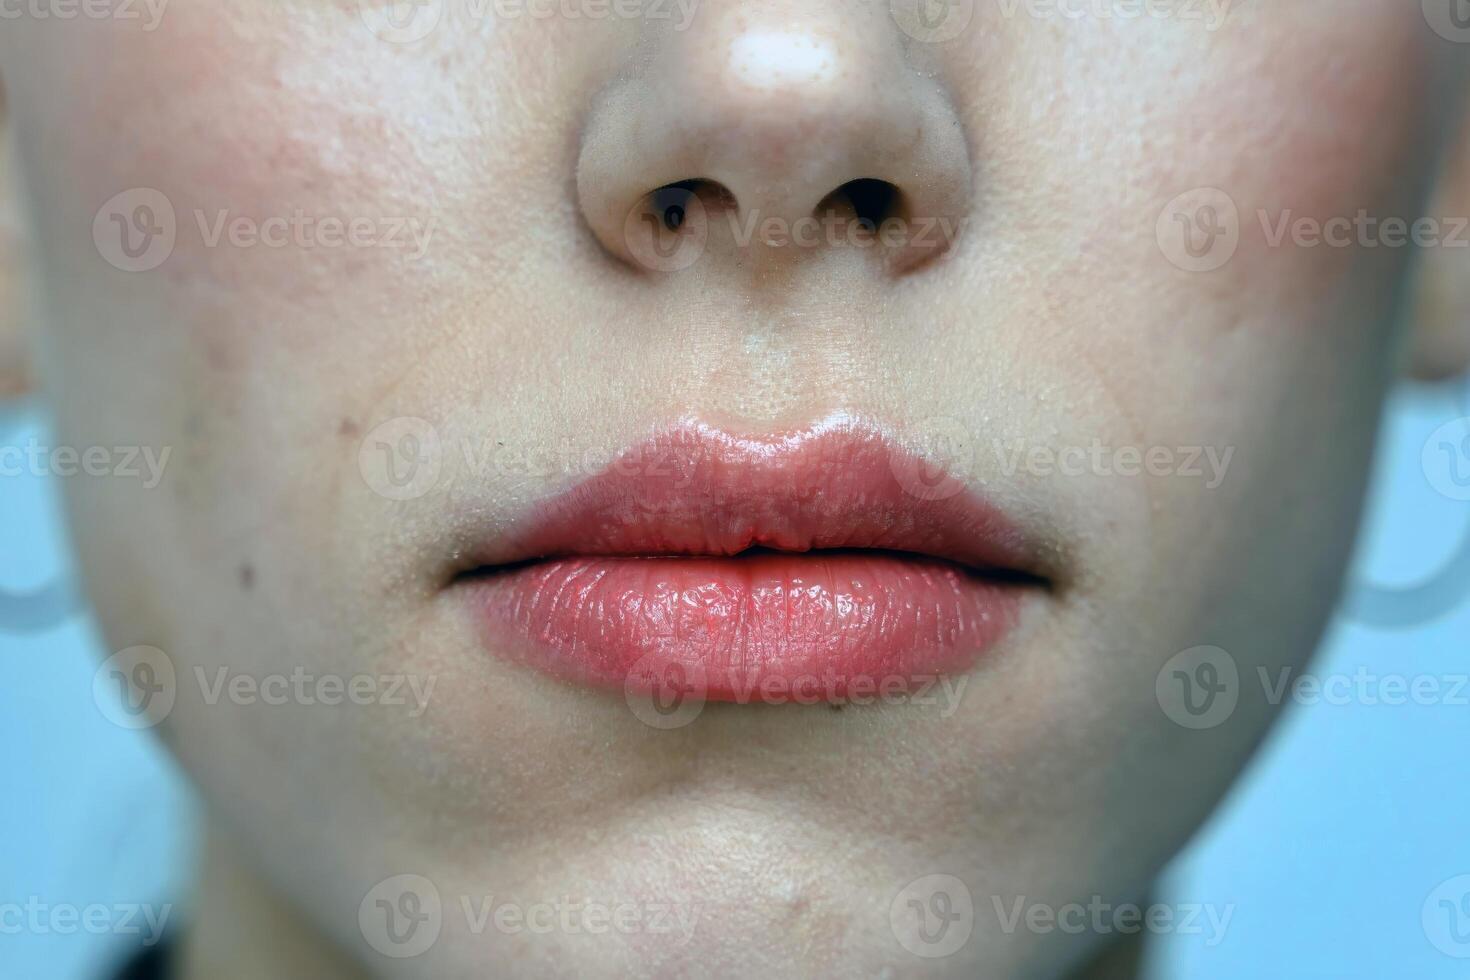 Sexy lips close view photo, female lips with lipstick closeup background, face detail portrait photo